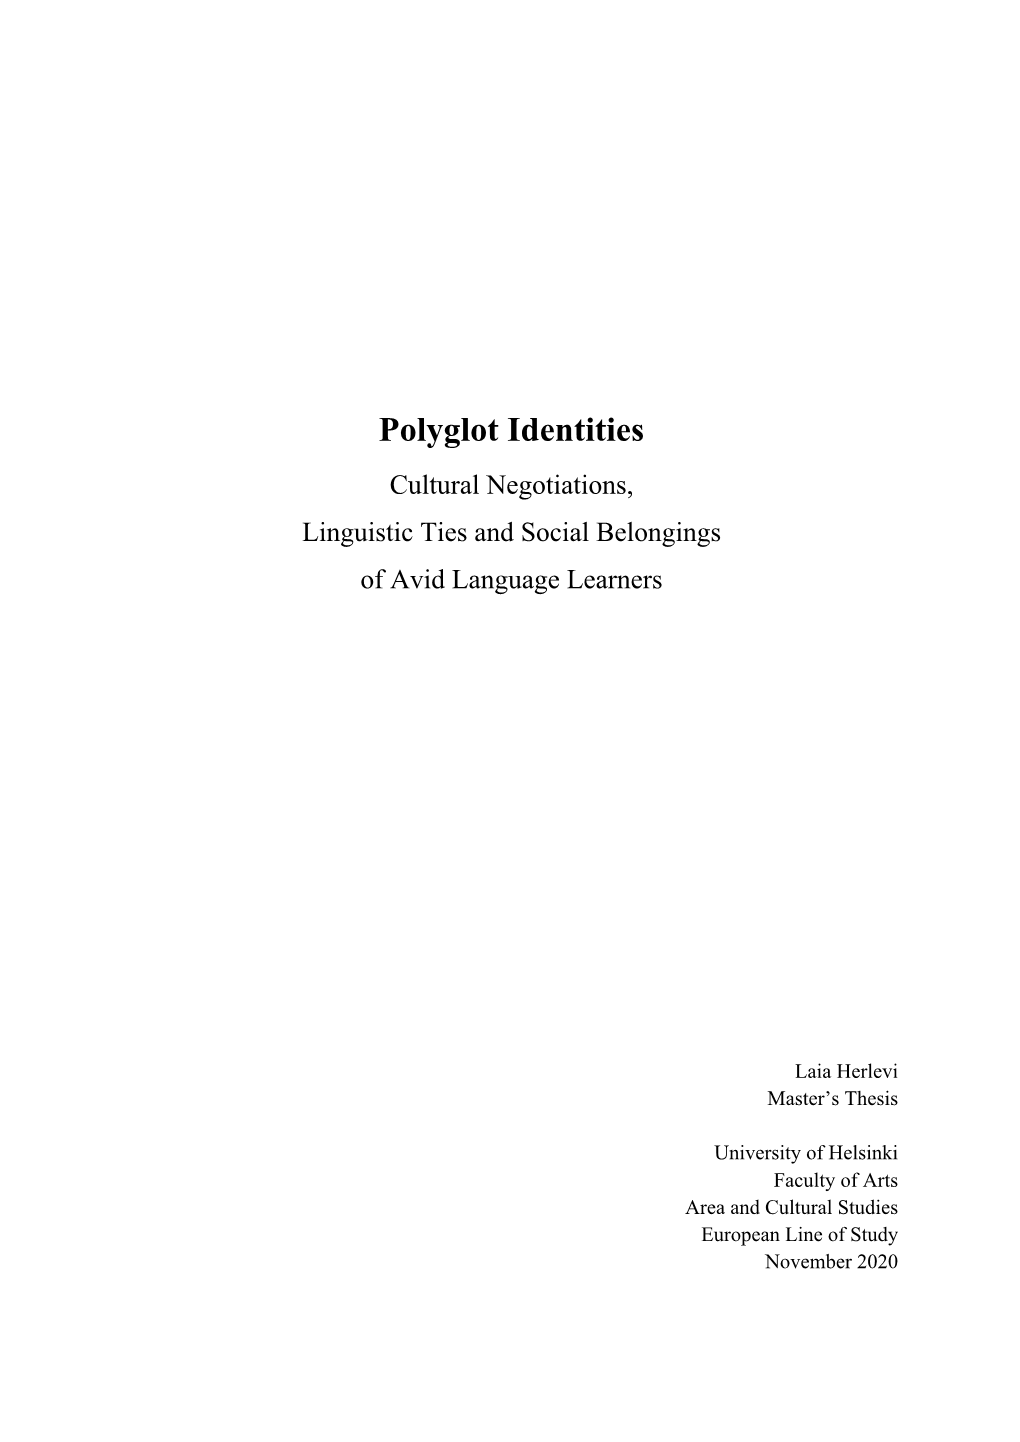 Polyglot Identities Cultural Negotiations, Linguistic Ties and Social Belongings of Avid Language Learners